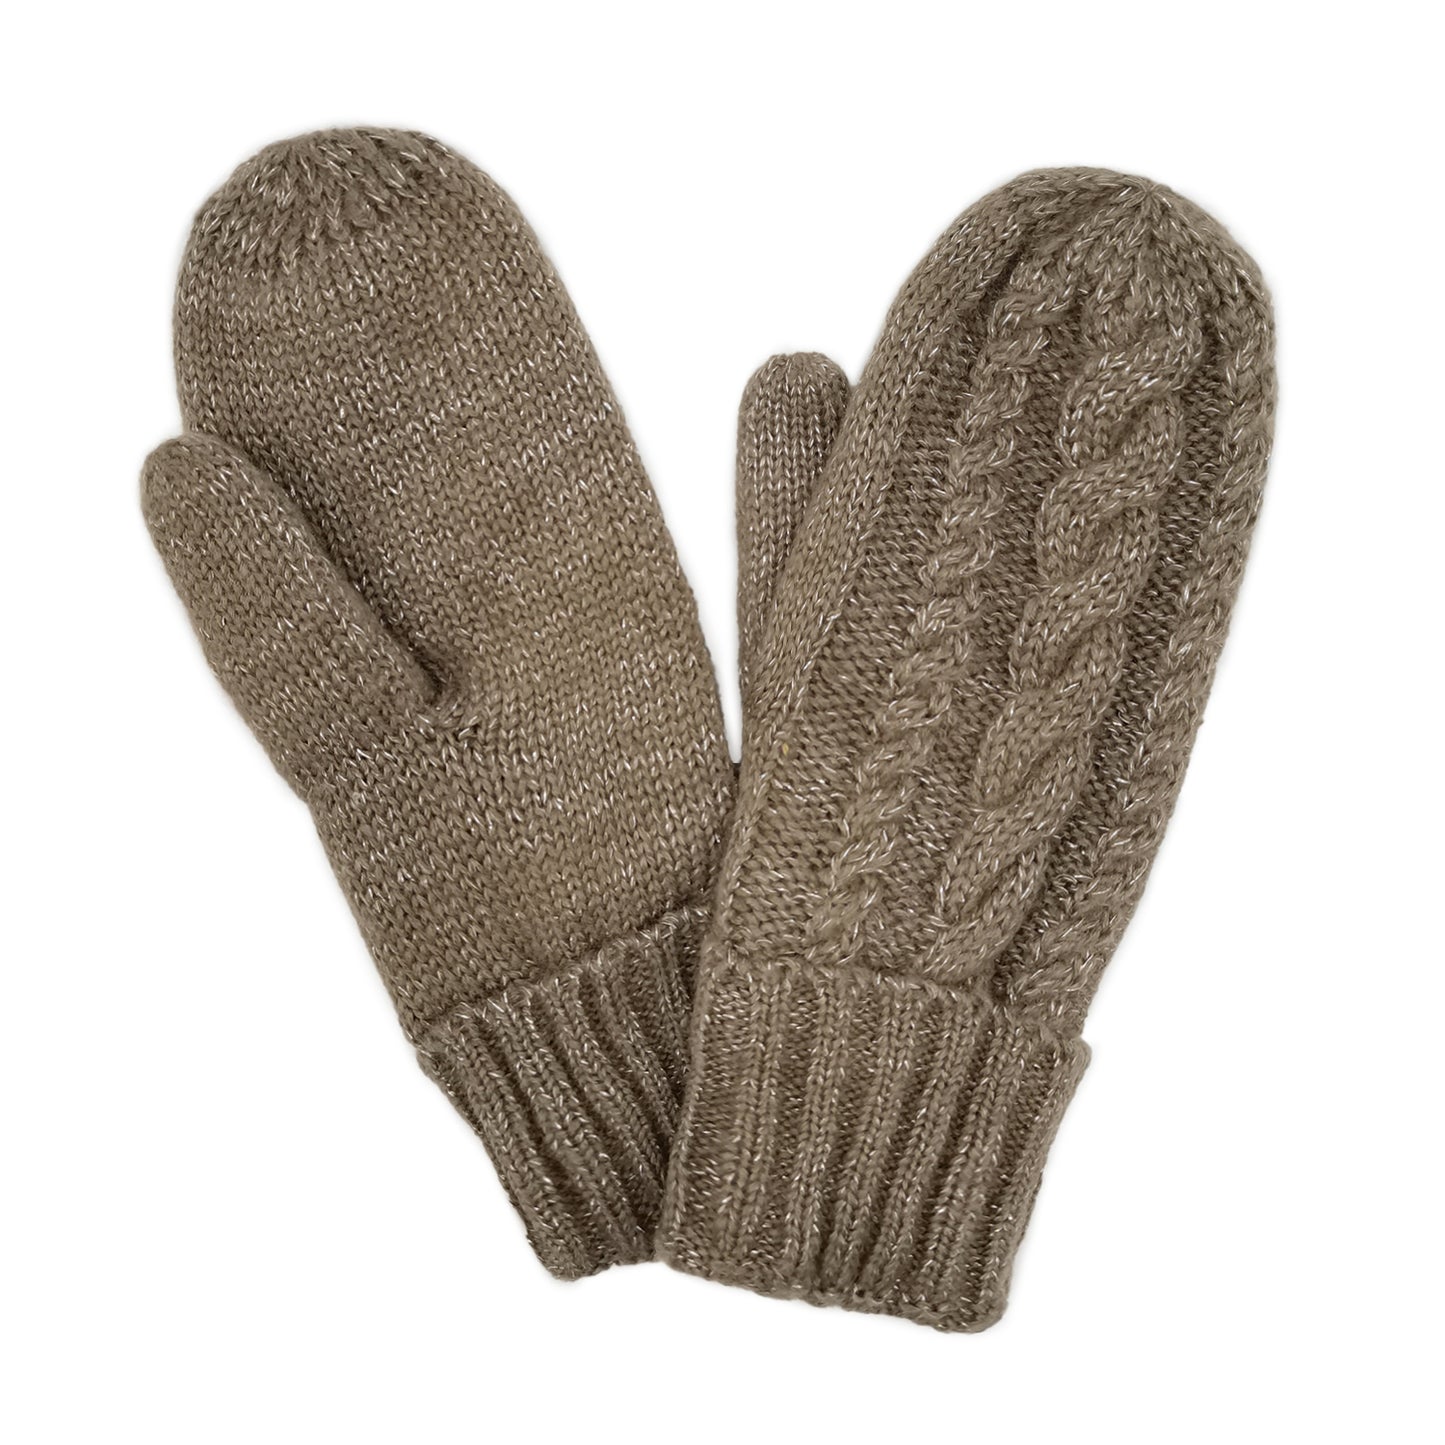 Shop for KW Fashion Cable Knit Mittens With Sherpa Lining  at doeverythinginloveny.com wholesale fashion accessories